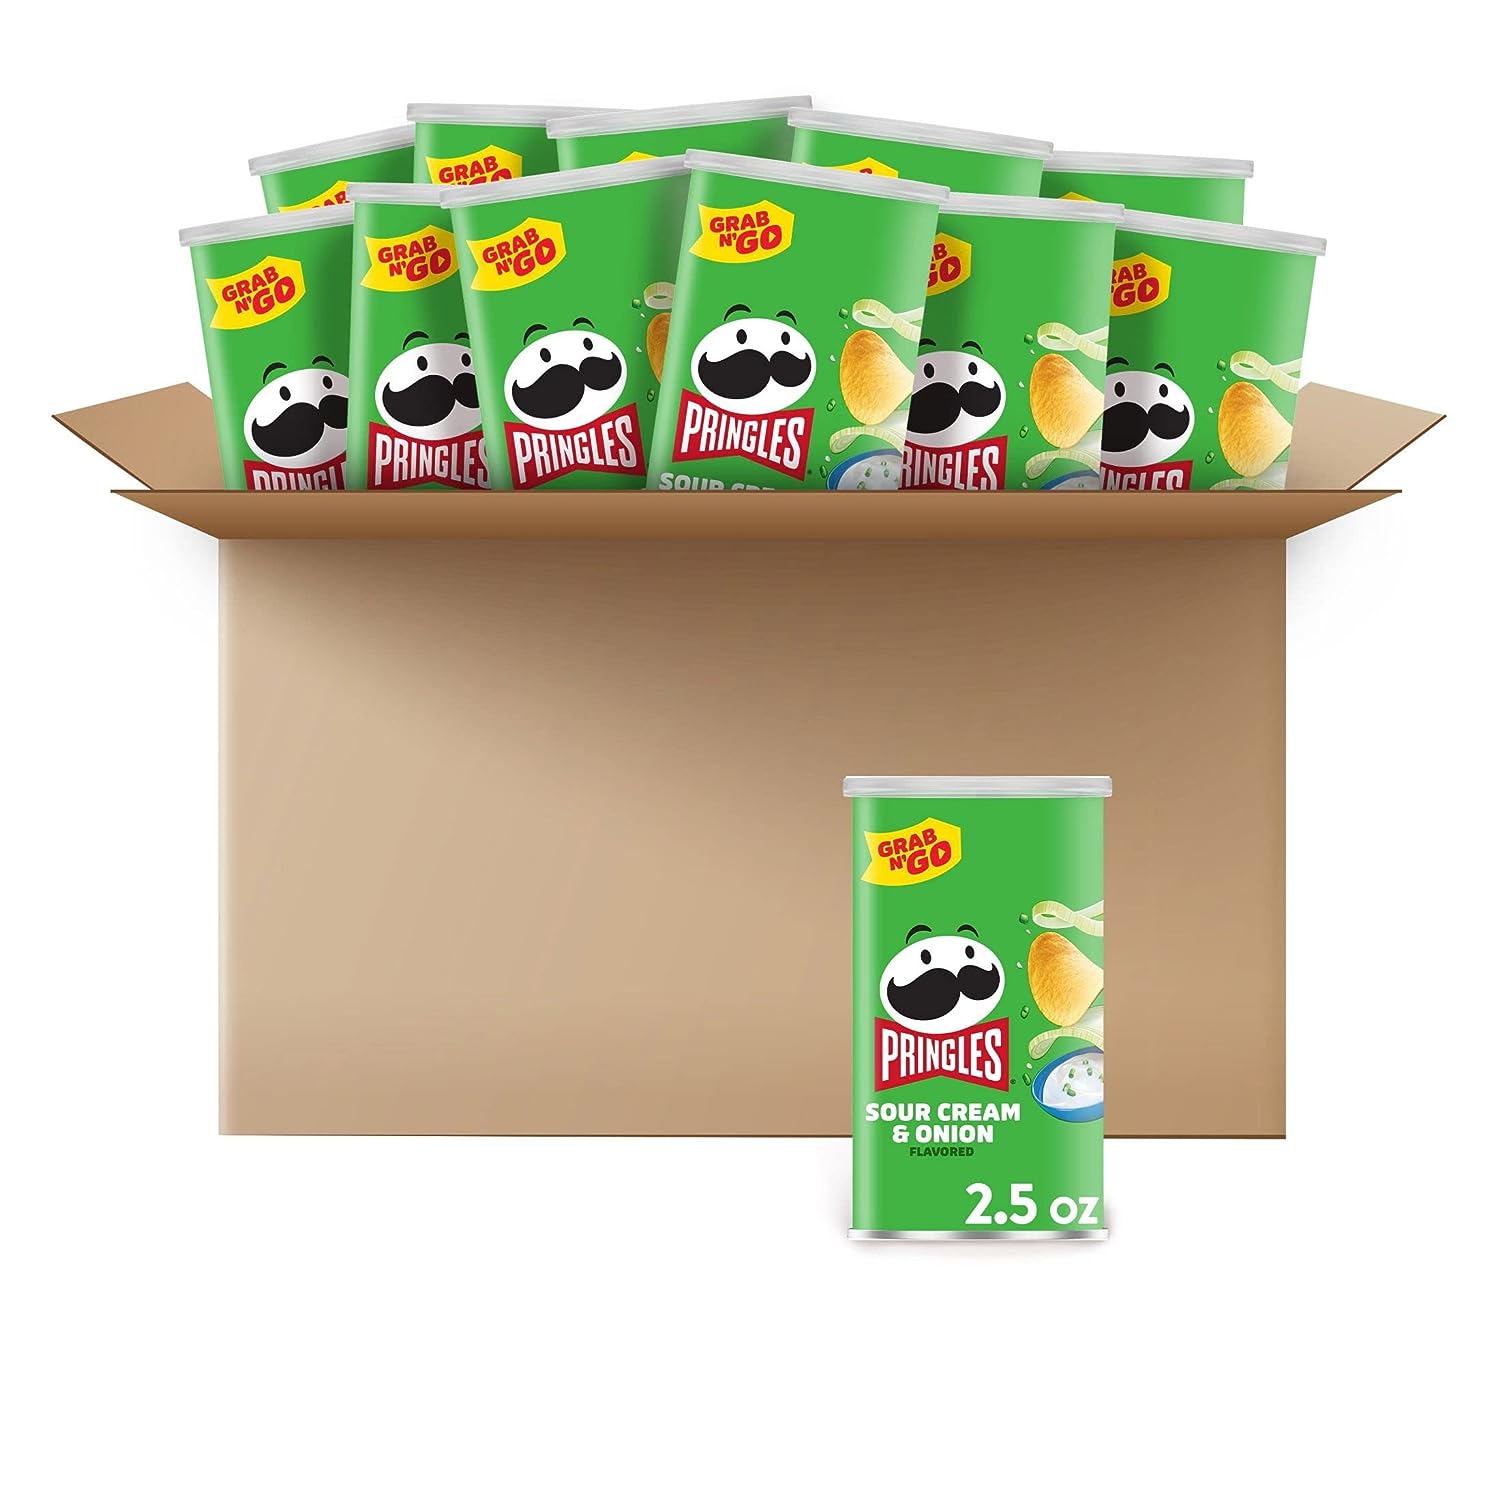 12-Count 2.5-Oz Pringles Grab N' Go Potato Crisps Chips (Sour Cream & Onion) $7.49 w/ S&S + Free Shipping w/ Prime or on orders over $35